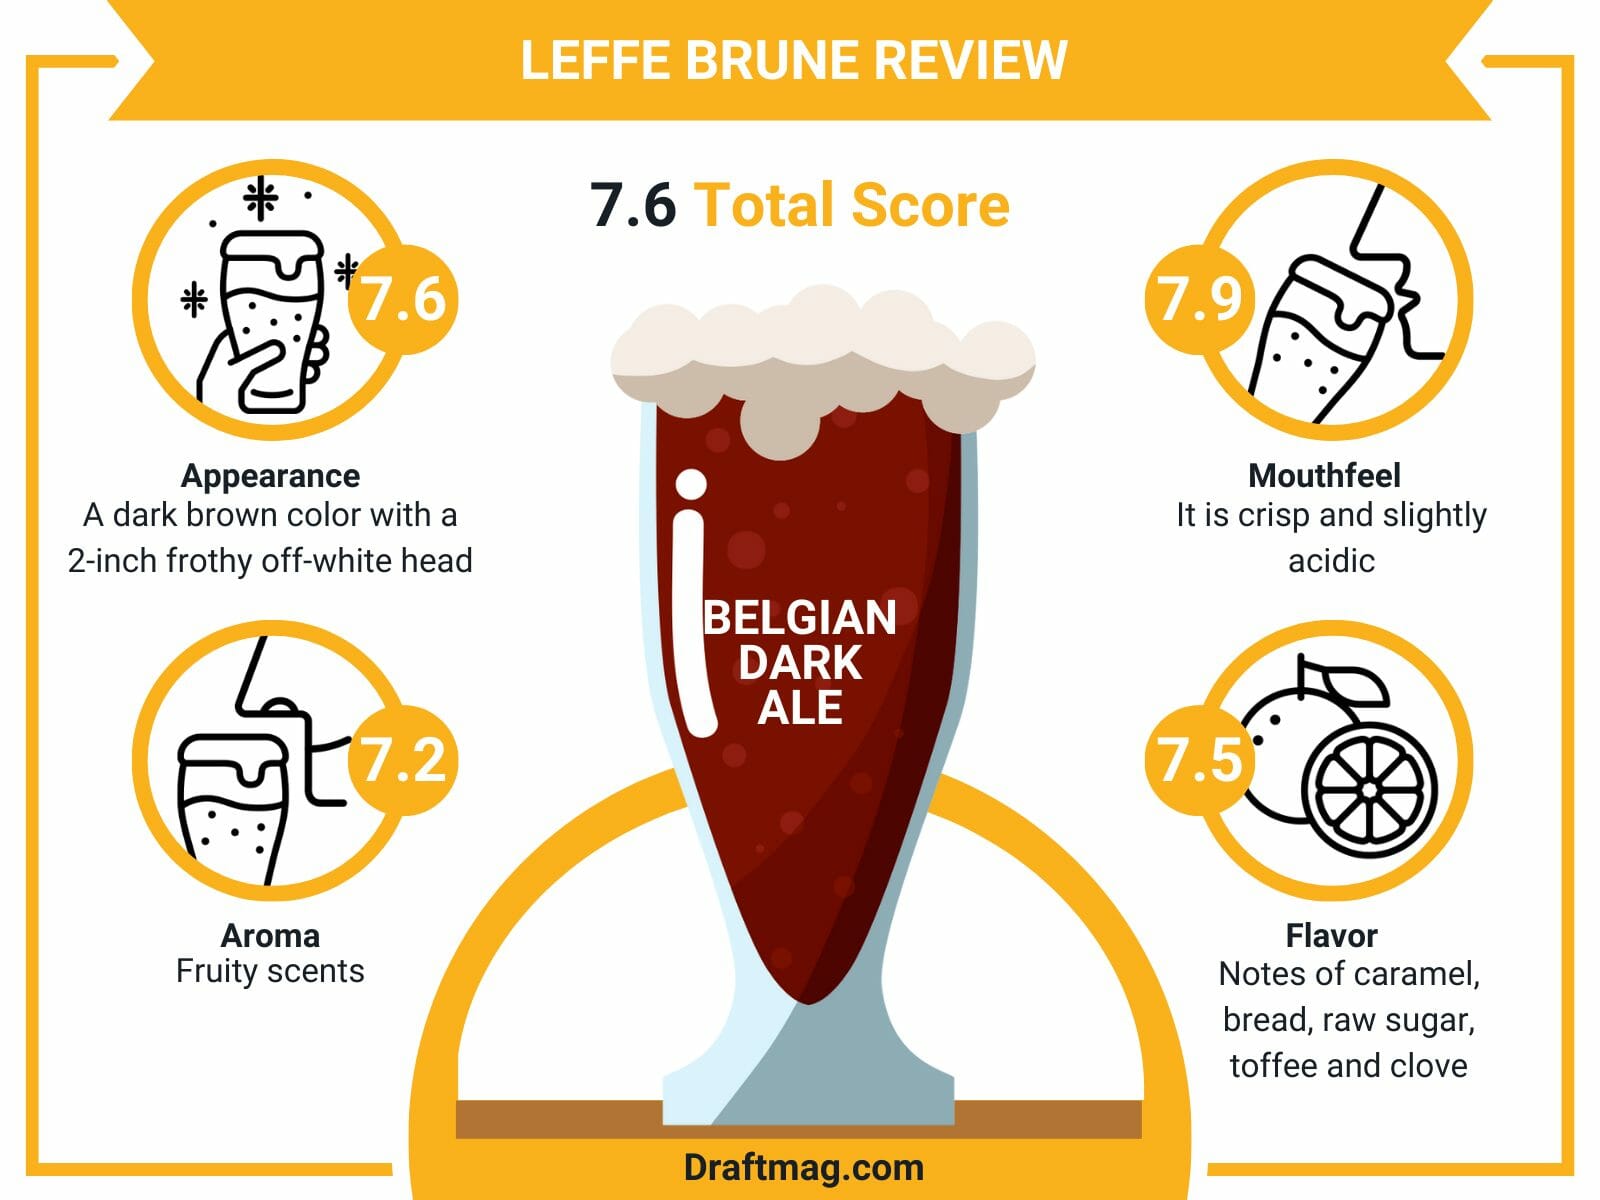 Leffe brune review infographic